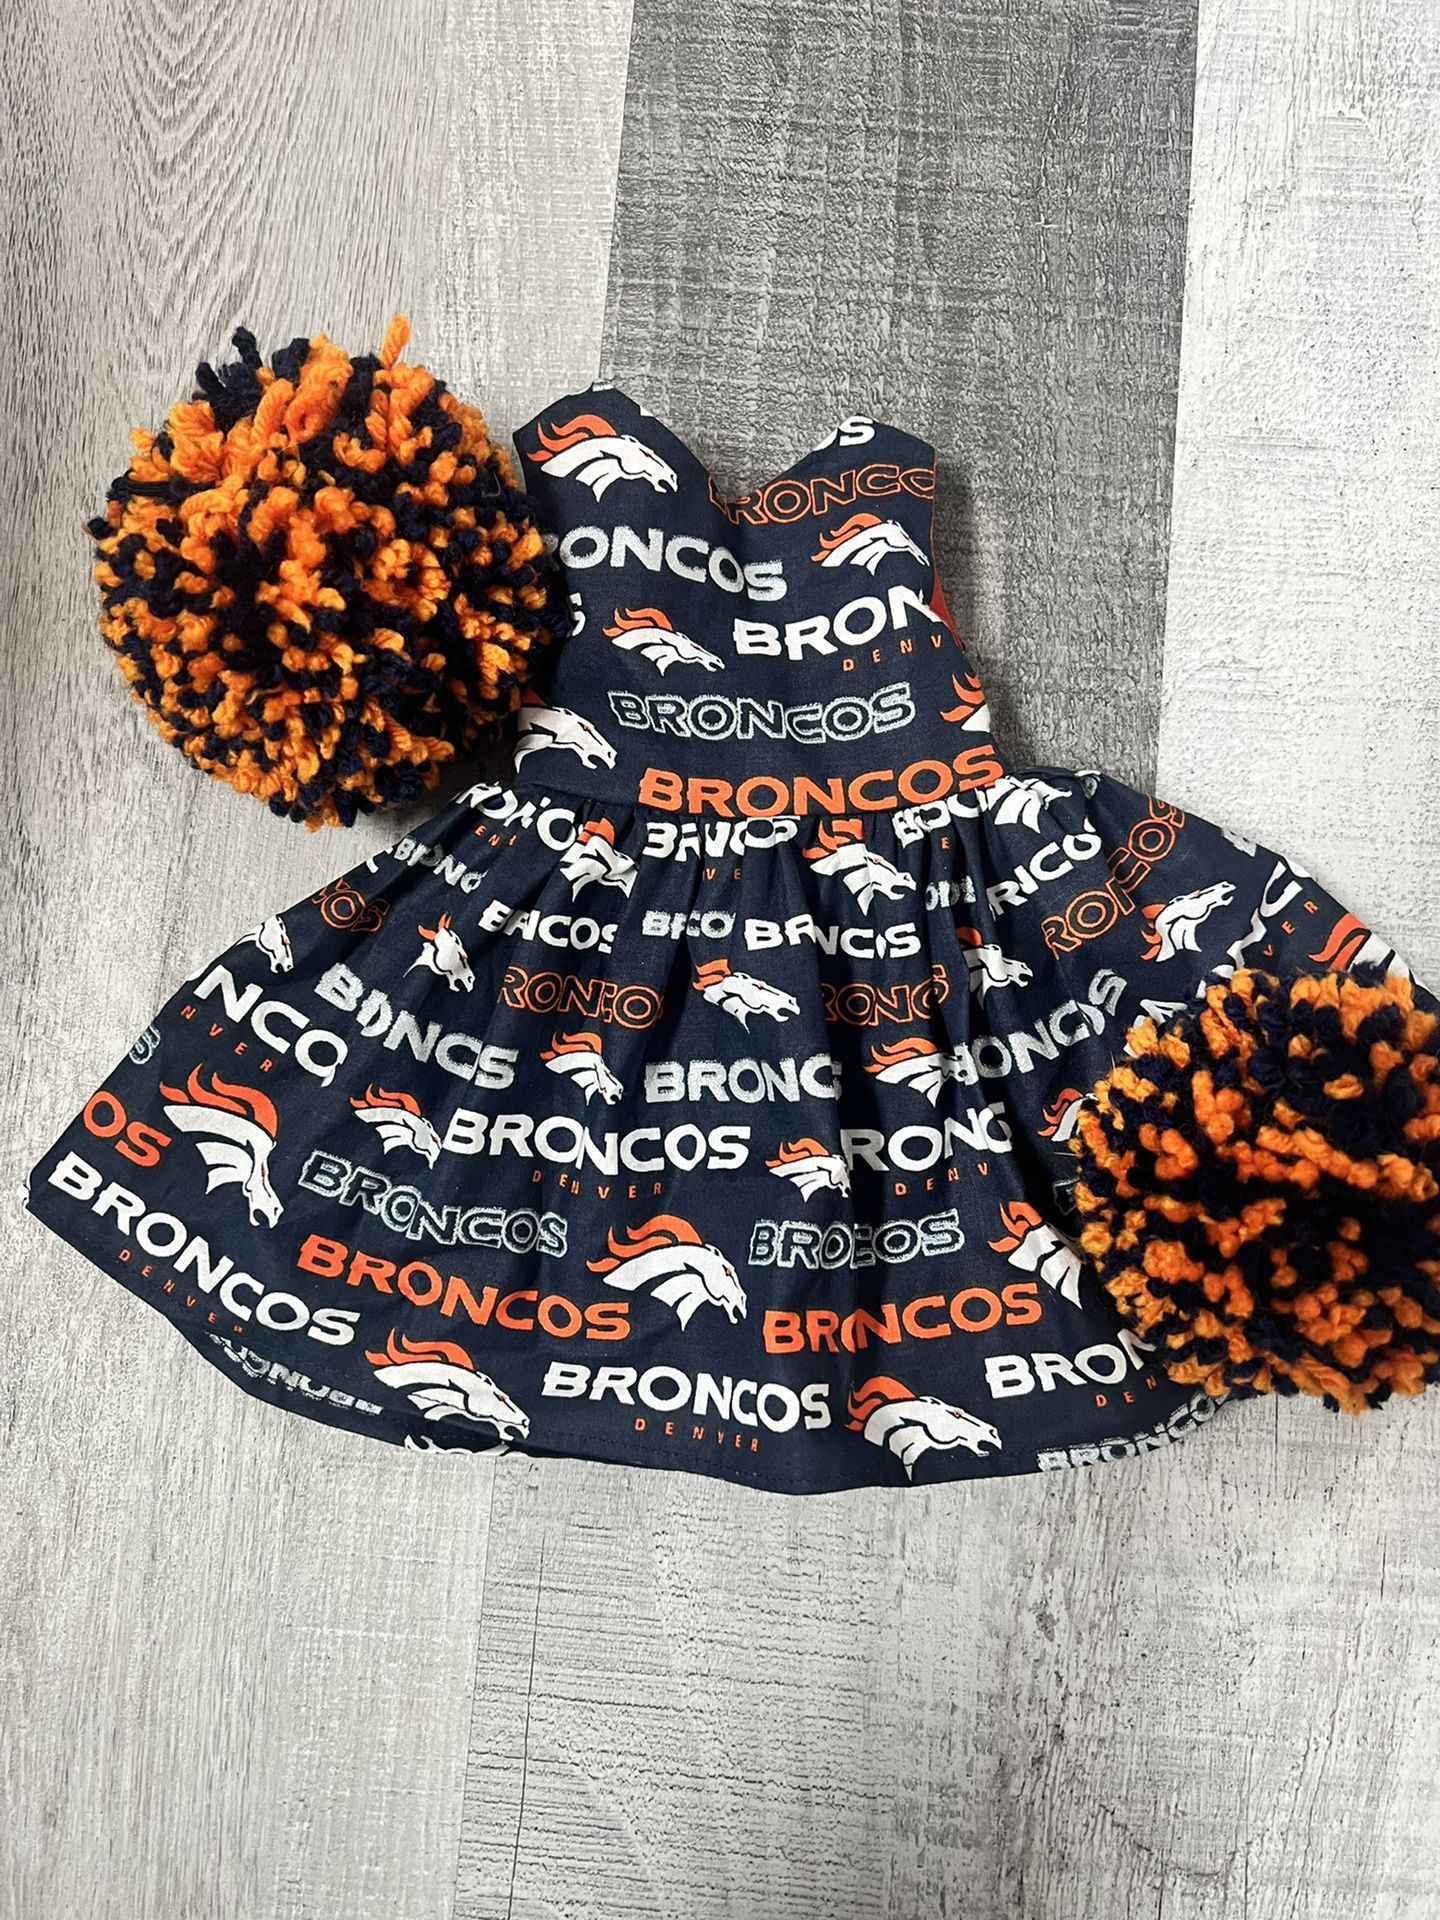 Doll Broncos Outfit